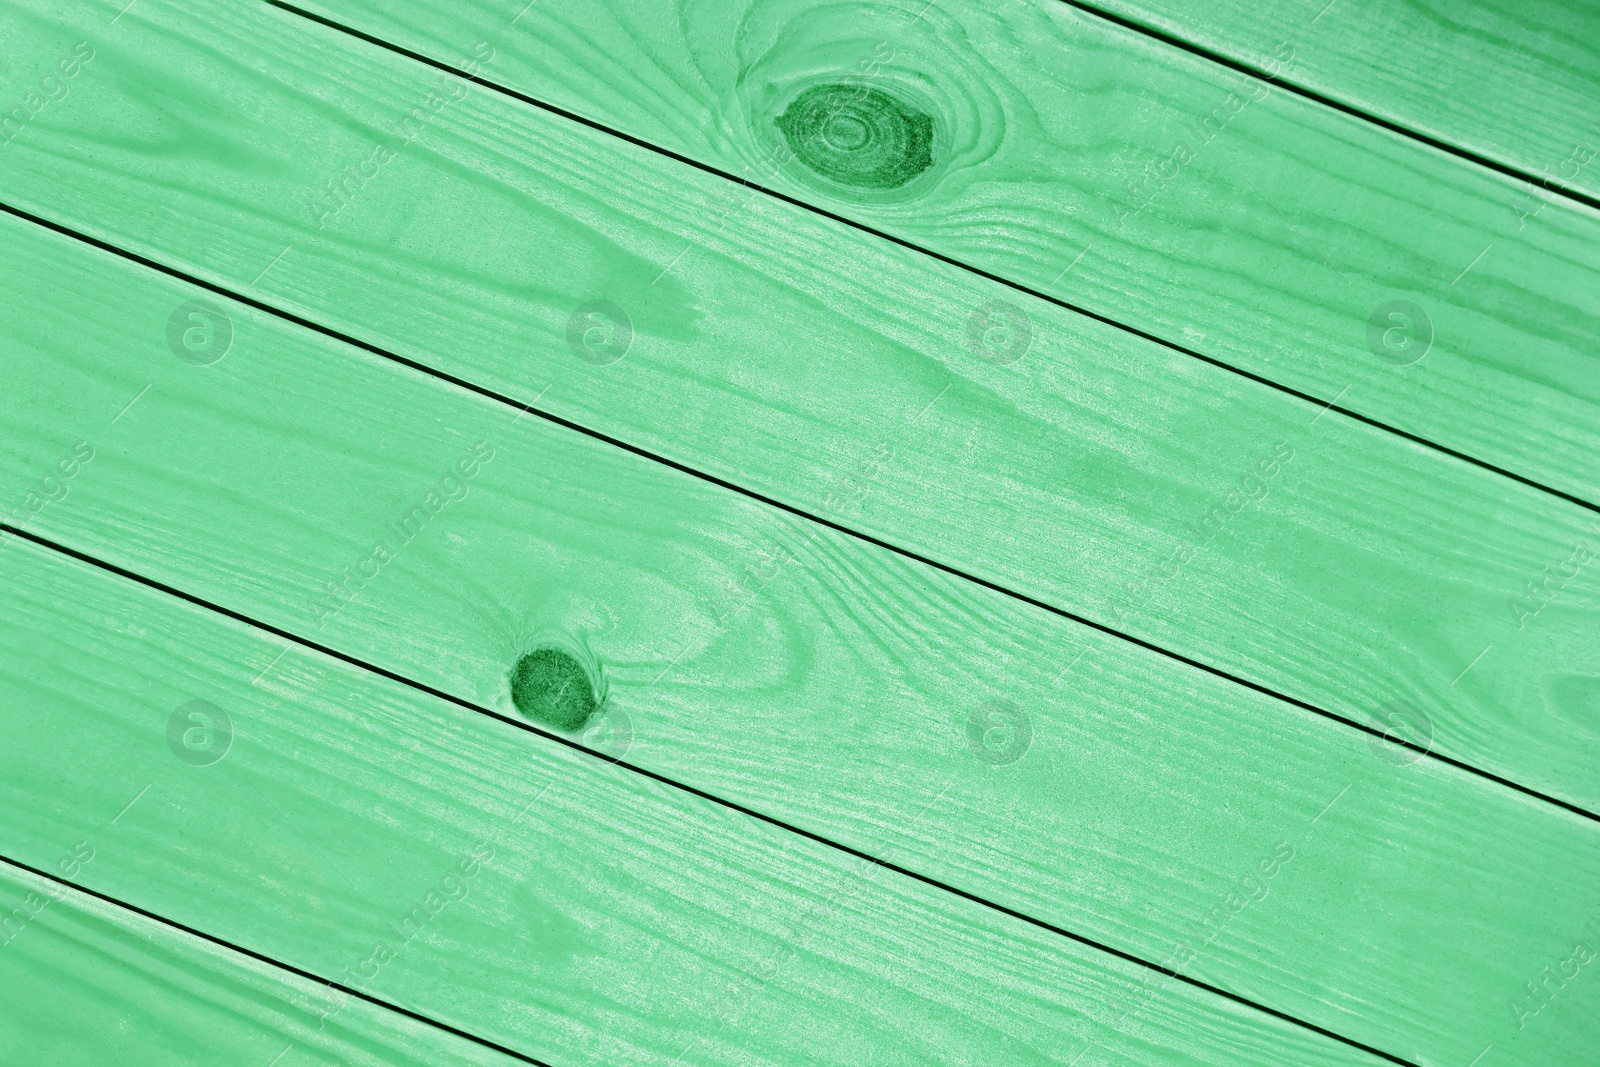 Image of Texture of wooden surface as background. Image toned in mint color 